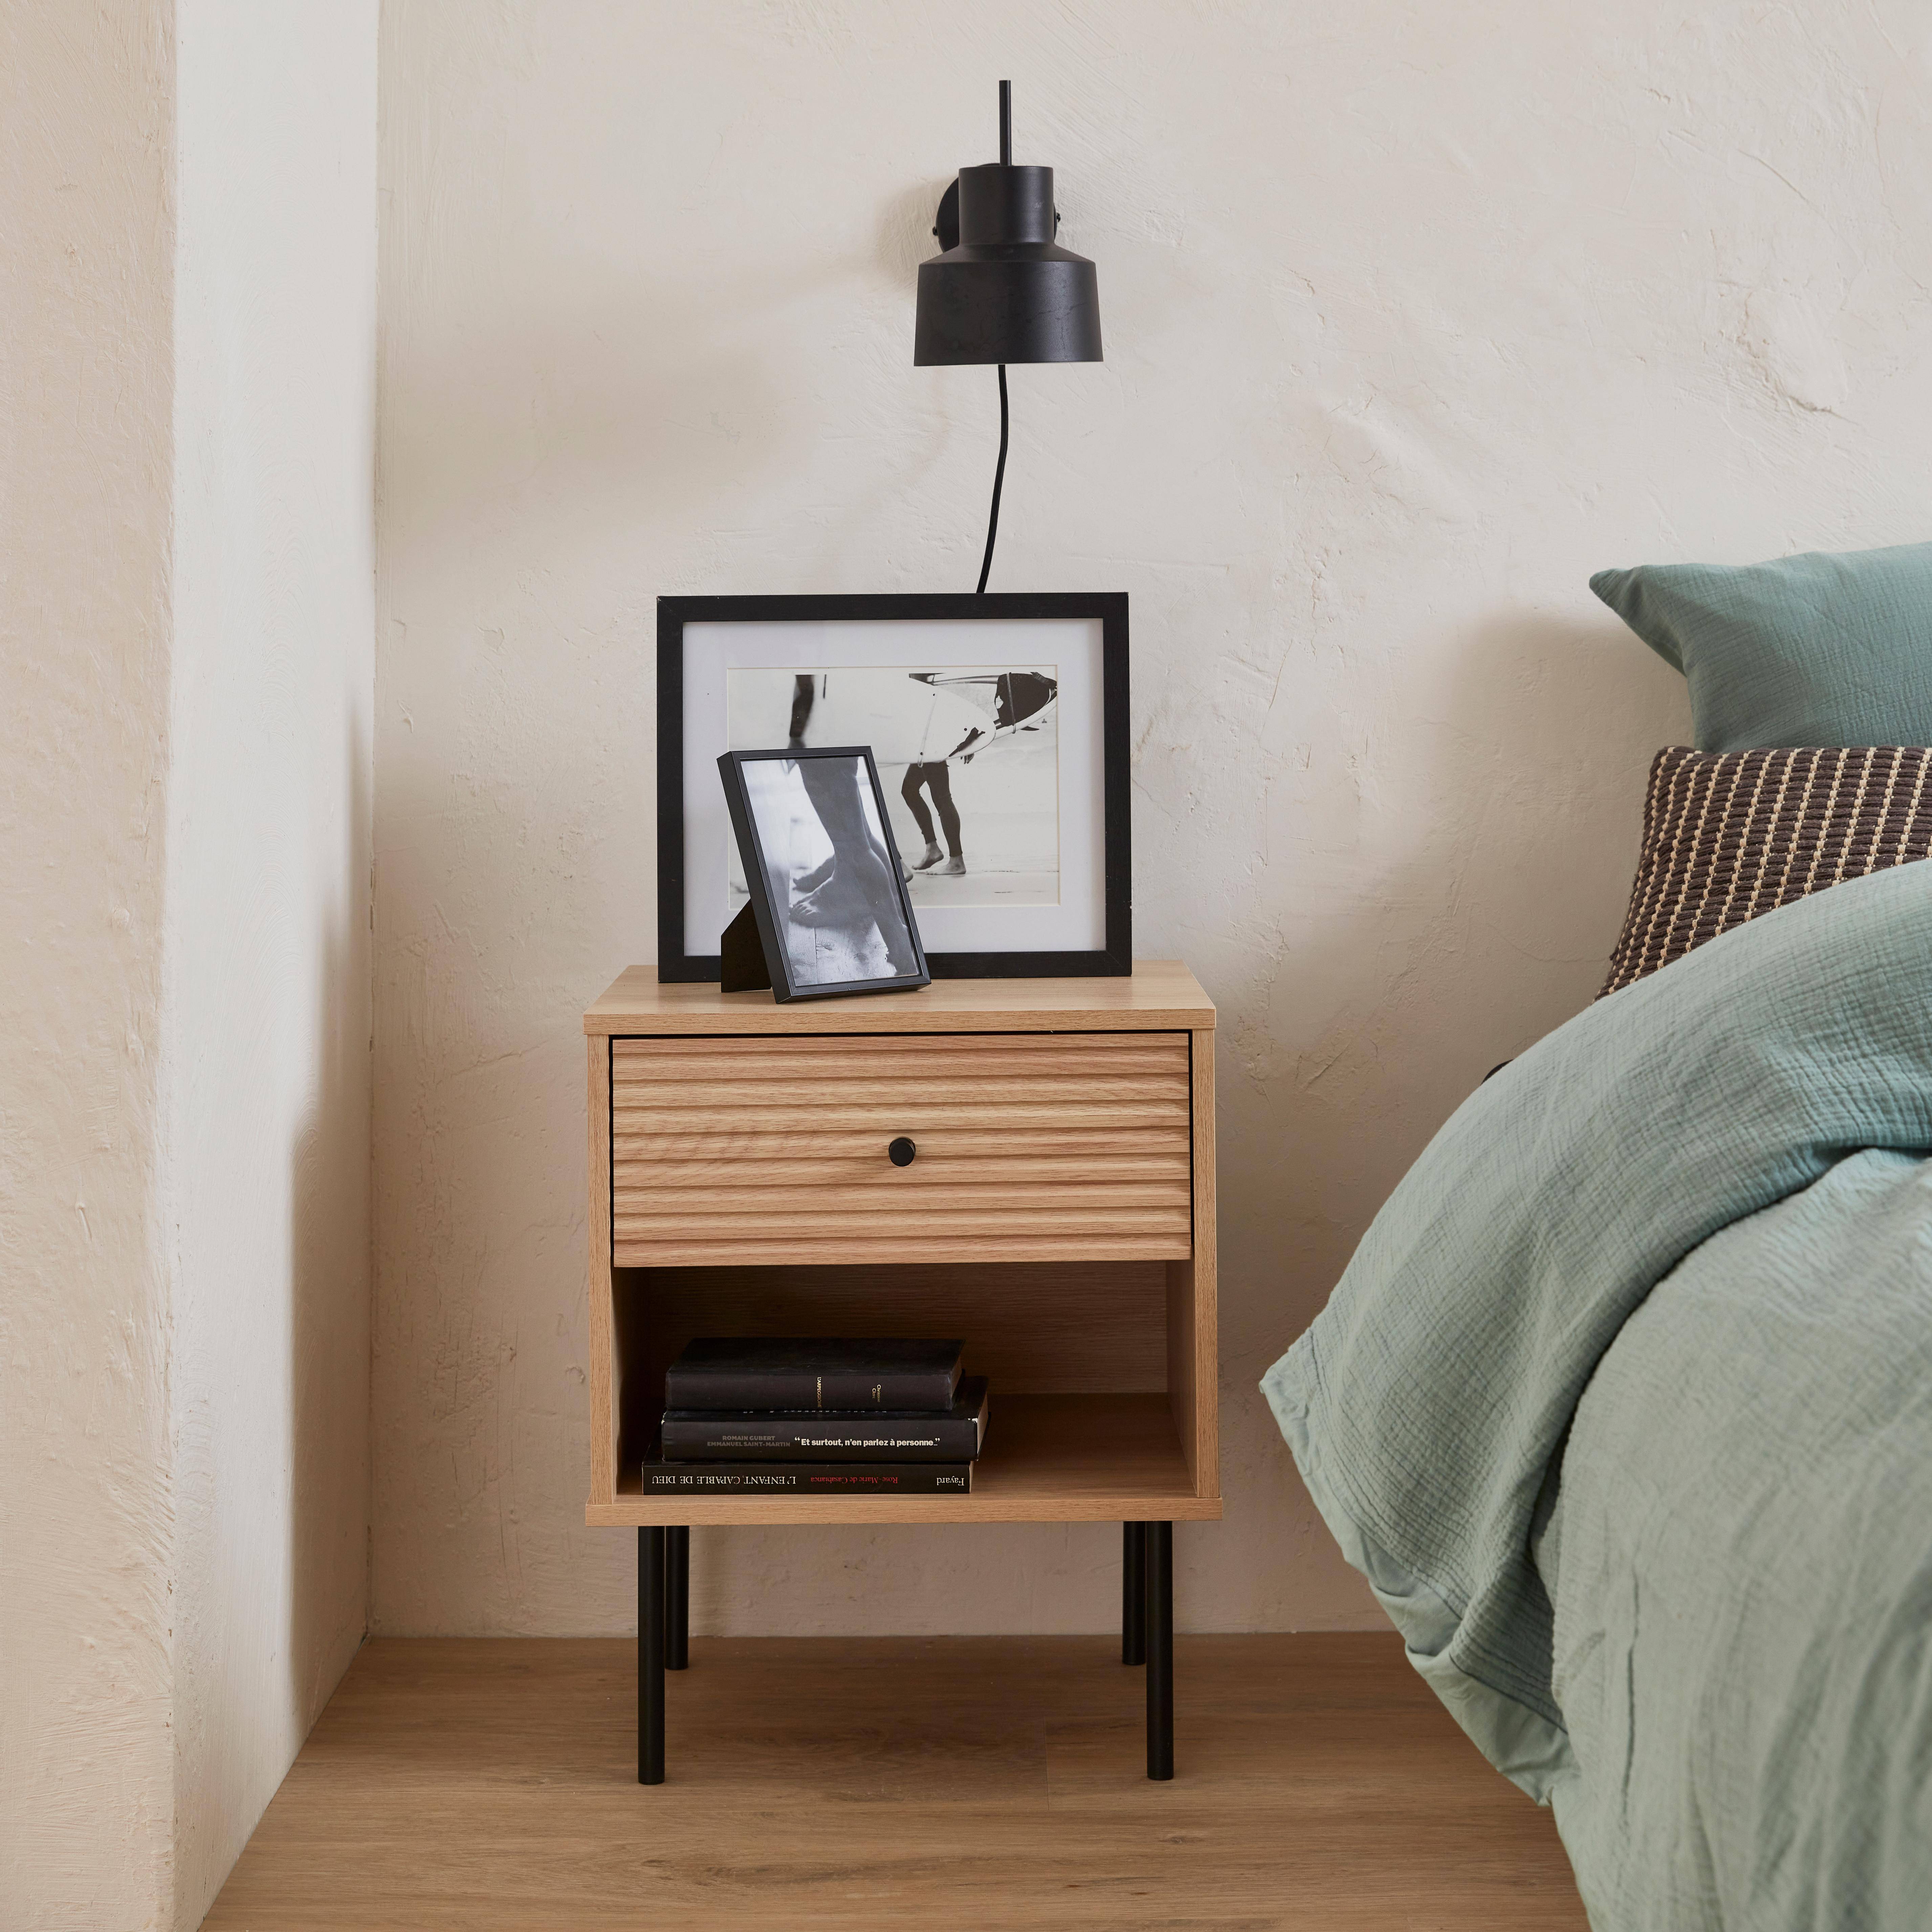 Grooved wood-effect bedside table, 45x39.5x55cm - Braga - Natural wood colour Photo1